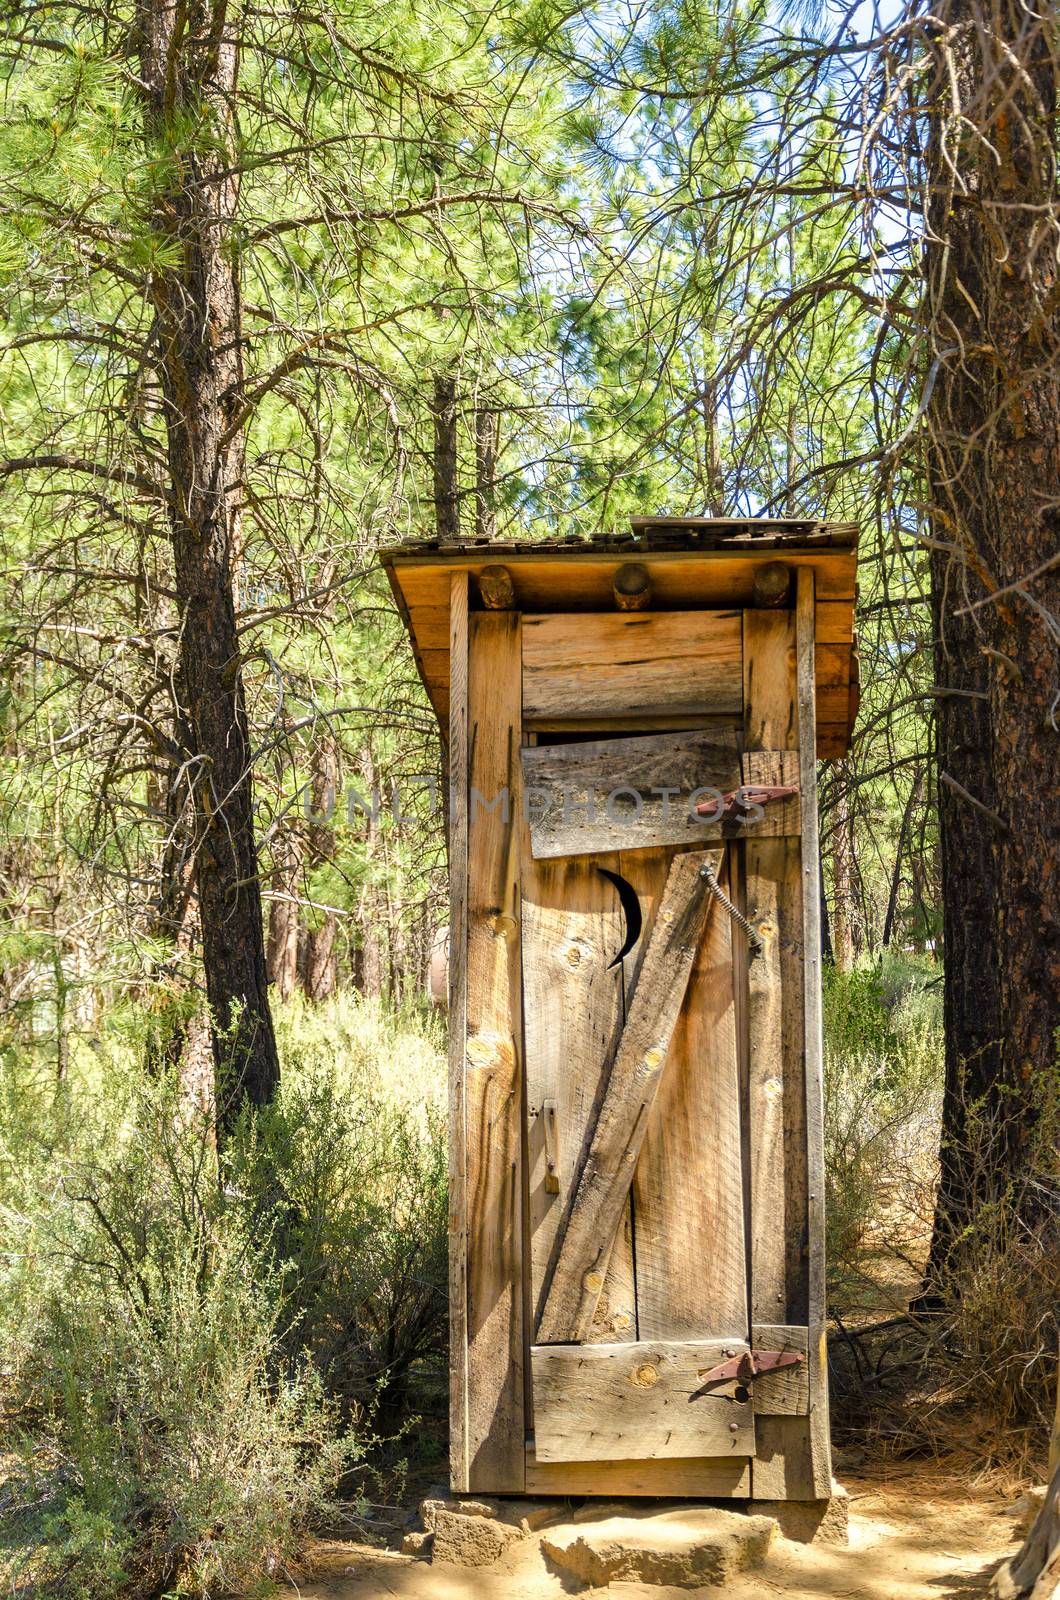 Historic Outhouse by jkraft5